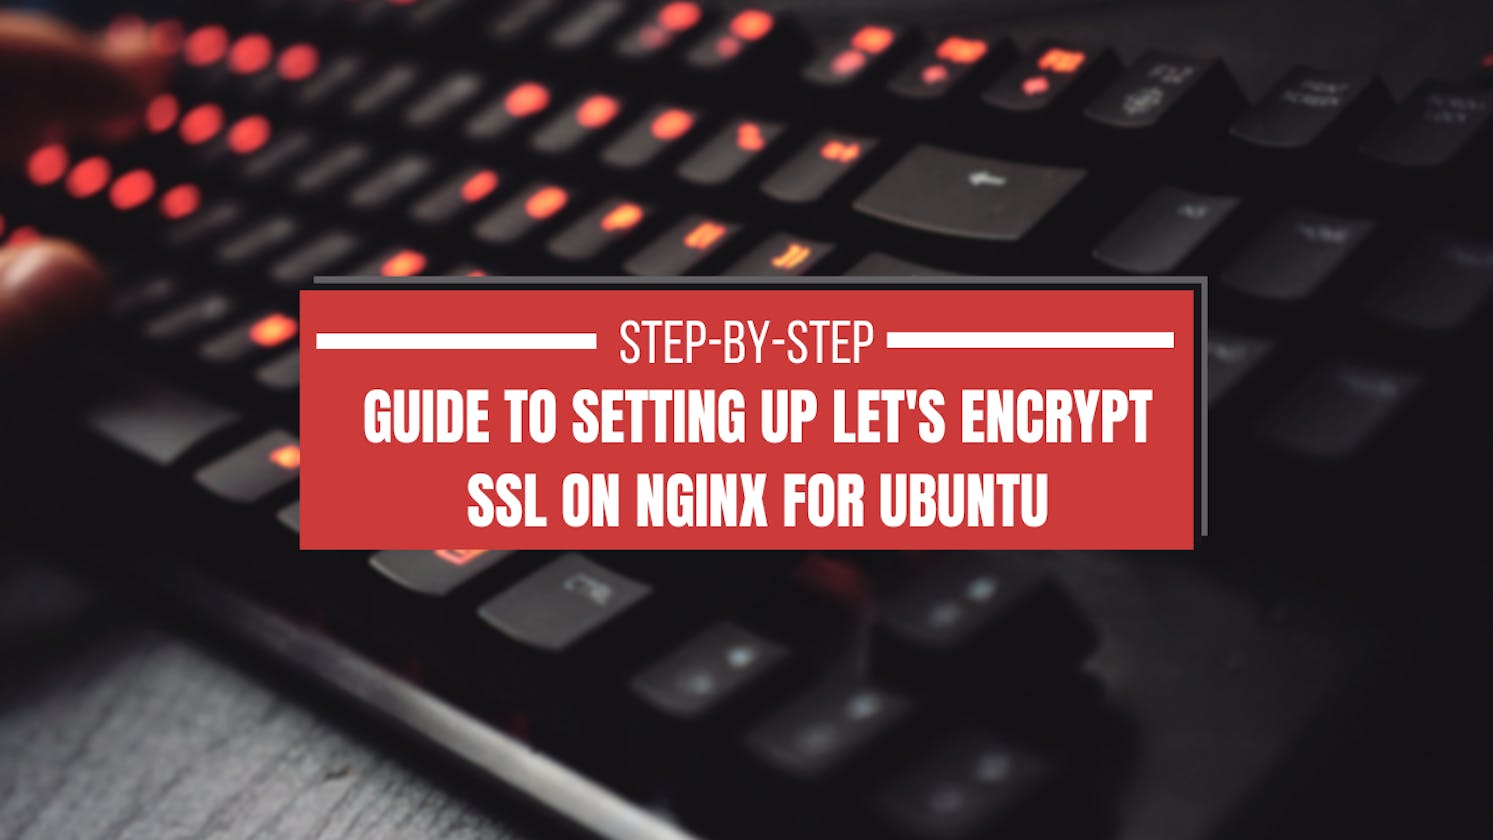 Step-by-Step Guide to Setting Up Let's Encrypt SSL on Nginx for Ubuntu